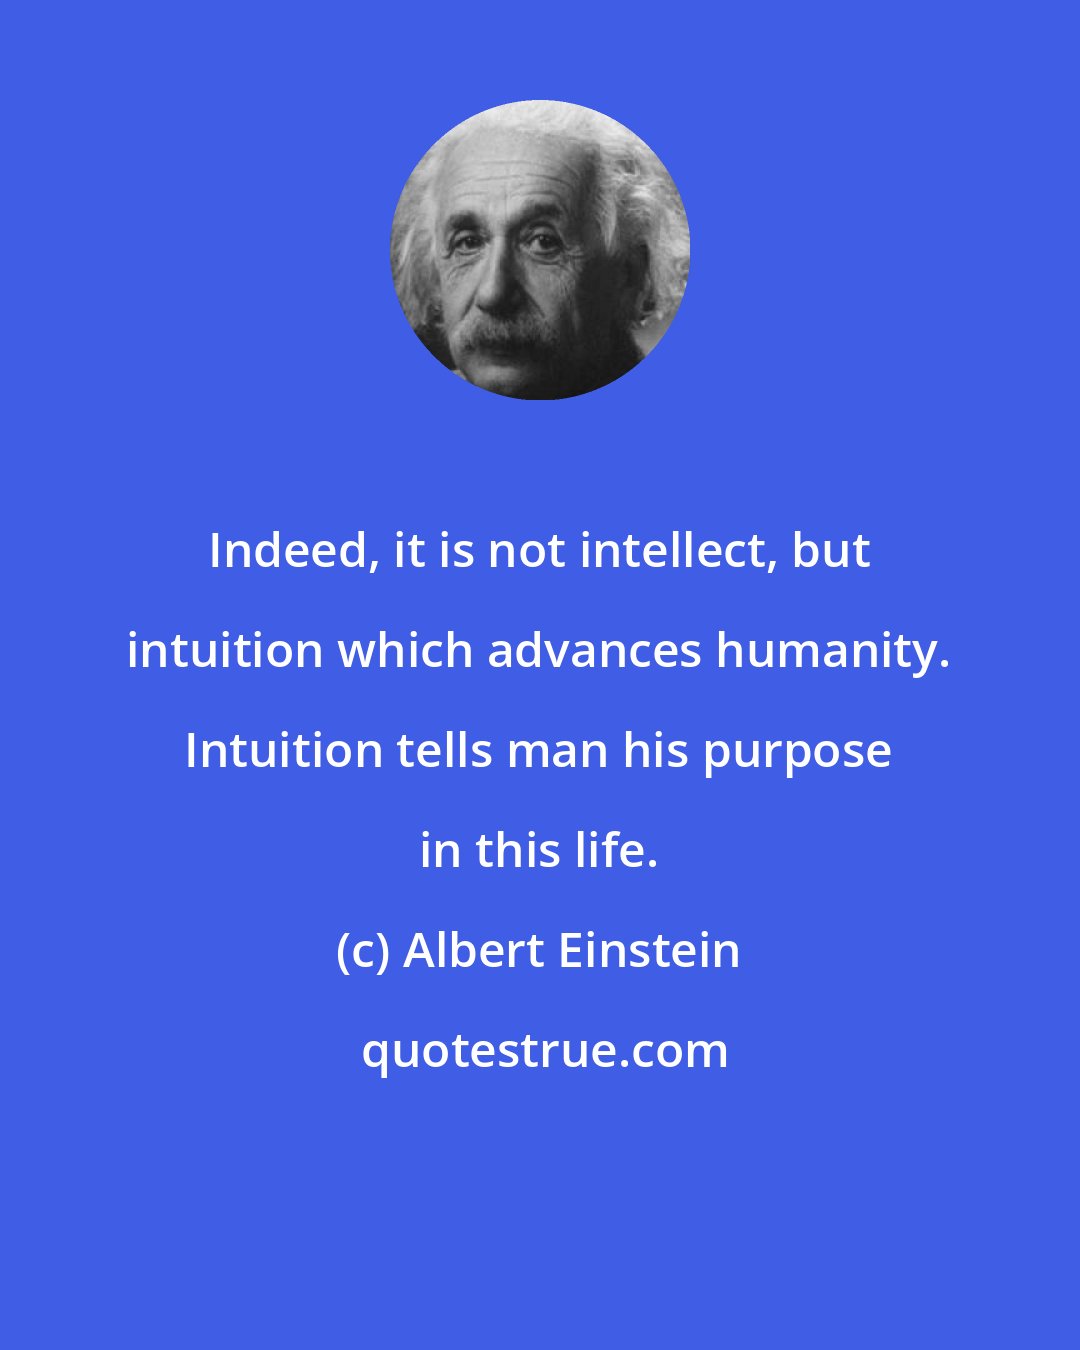 Albert Einstein: Indeed, it is not intellect, but intuition which advances humanity. Intuition tells man his purpose in this life.